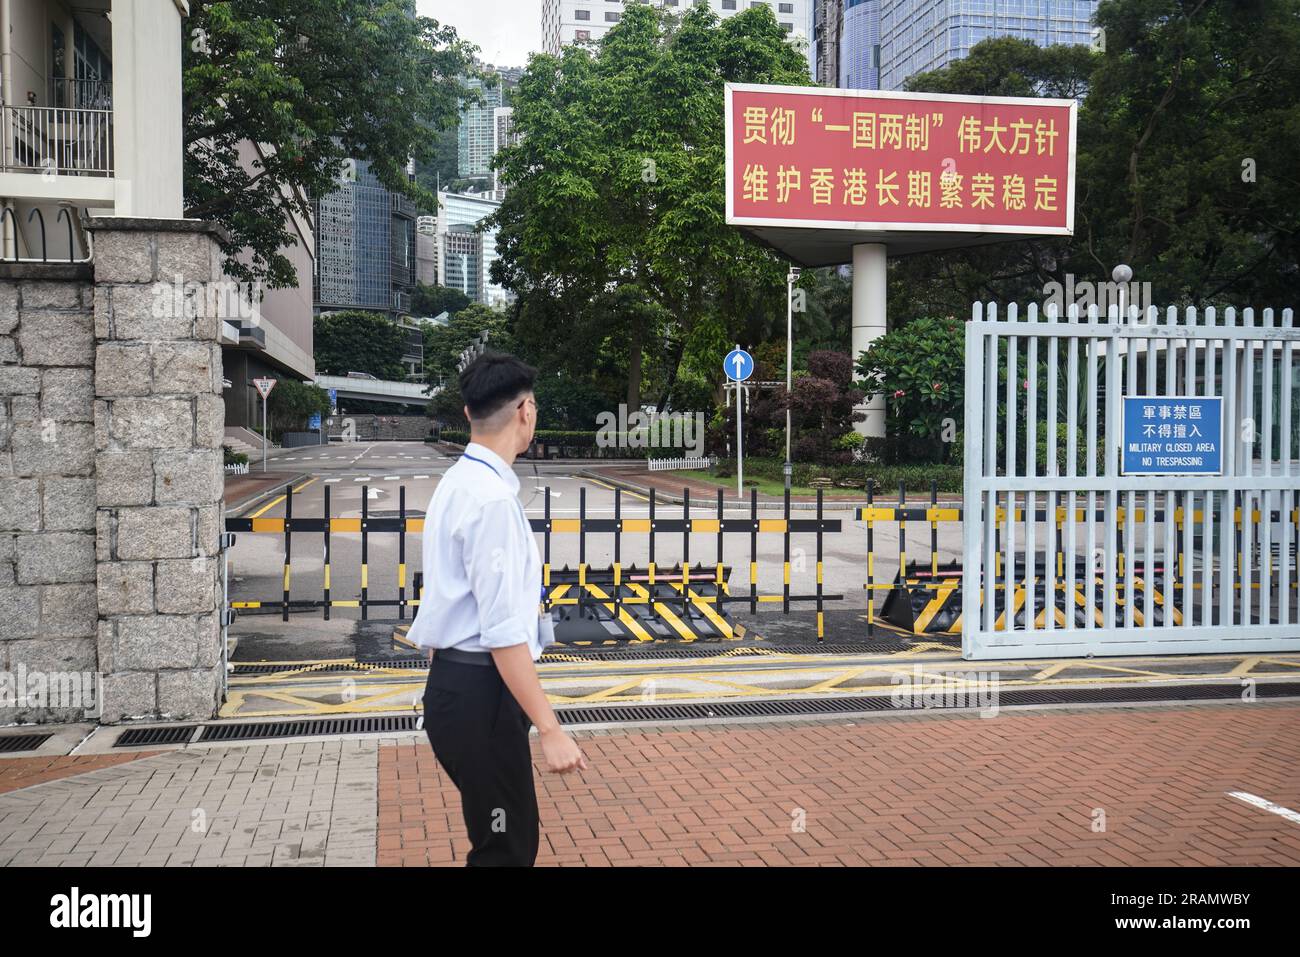 A man walks past the entrance gate to the Chinese People's Liberation Army Forces Hong Kong Building in Hong Kong. The Central Barracks Amethyst Block is one of the barracks of Chinese People's Liberation Army basement, it is located next to the Central Government Offices. Stock Photo